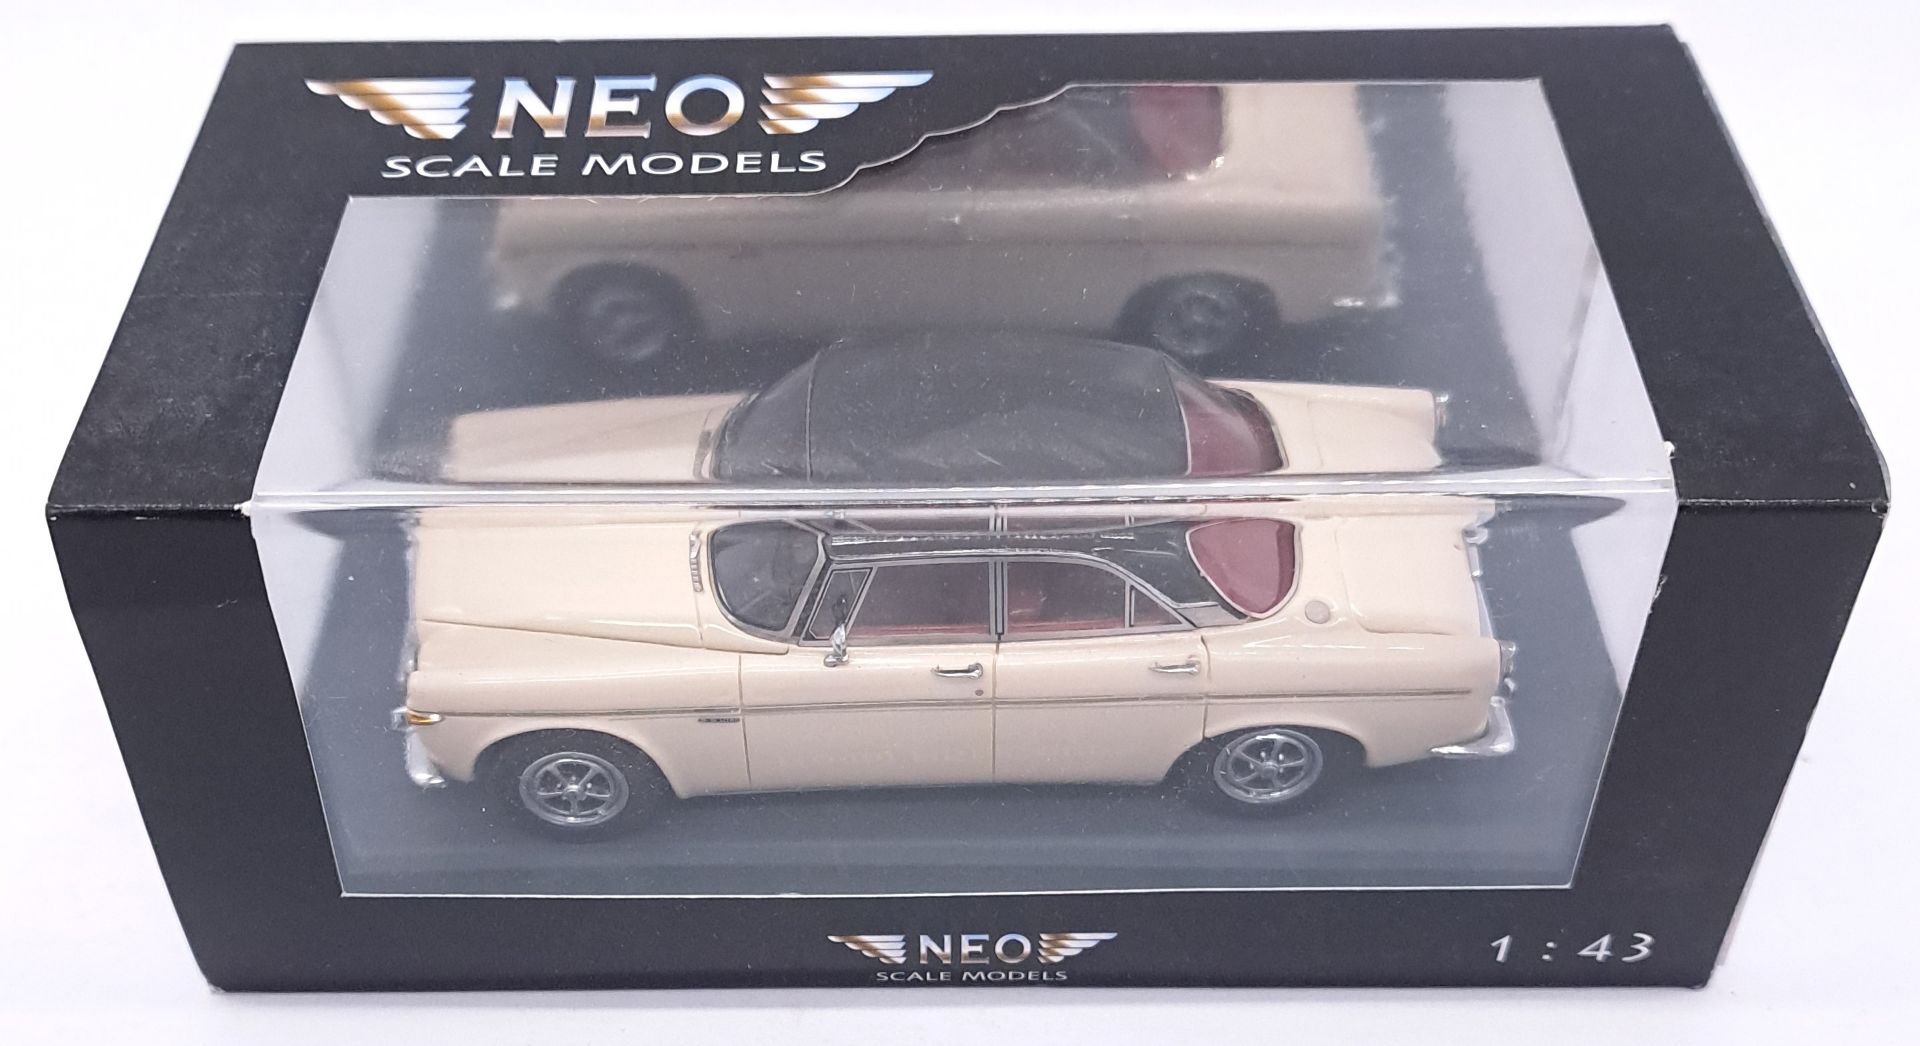 NEO Scale Models, a boxed 1:43 scale group - Bild 3 aus 4